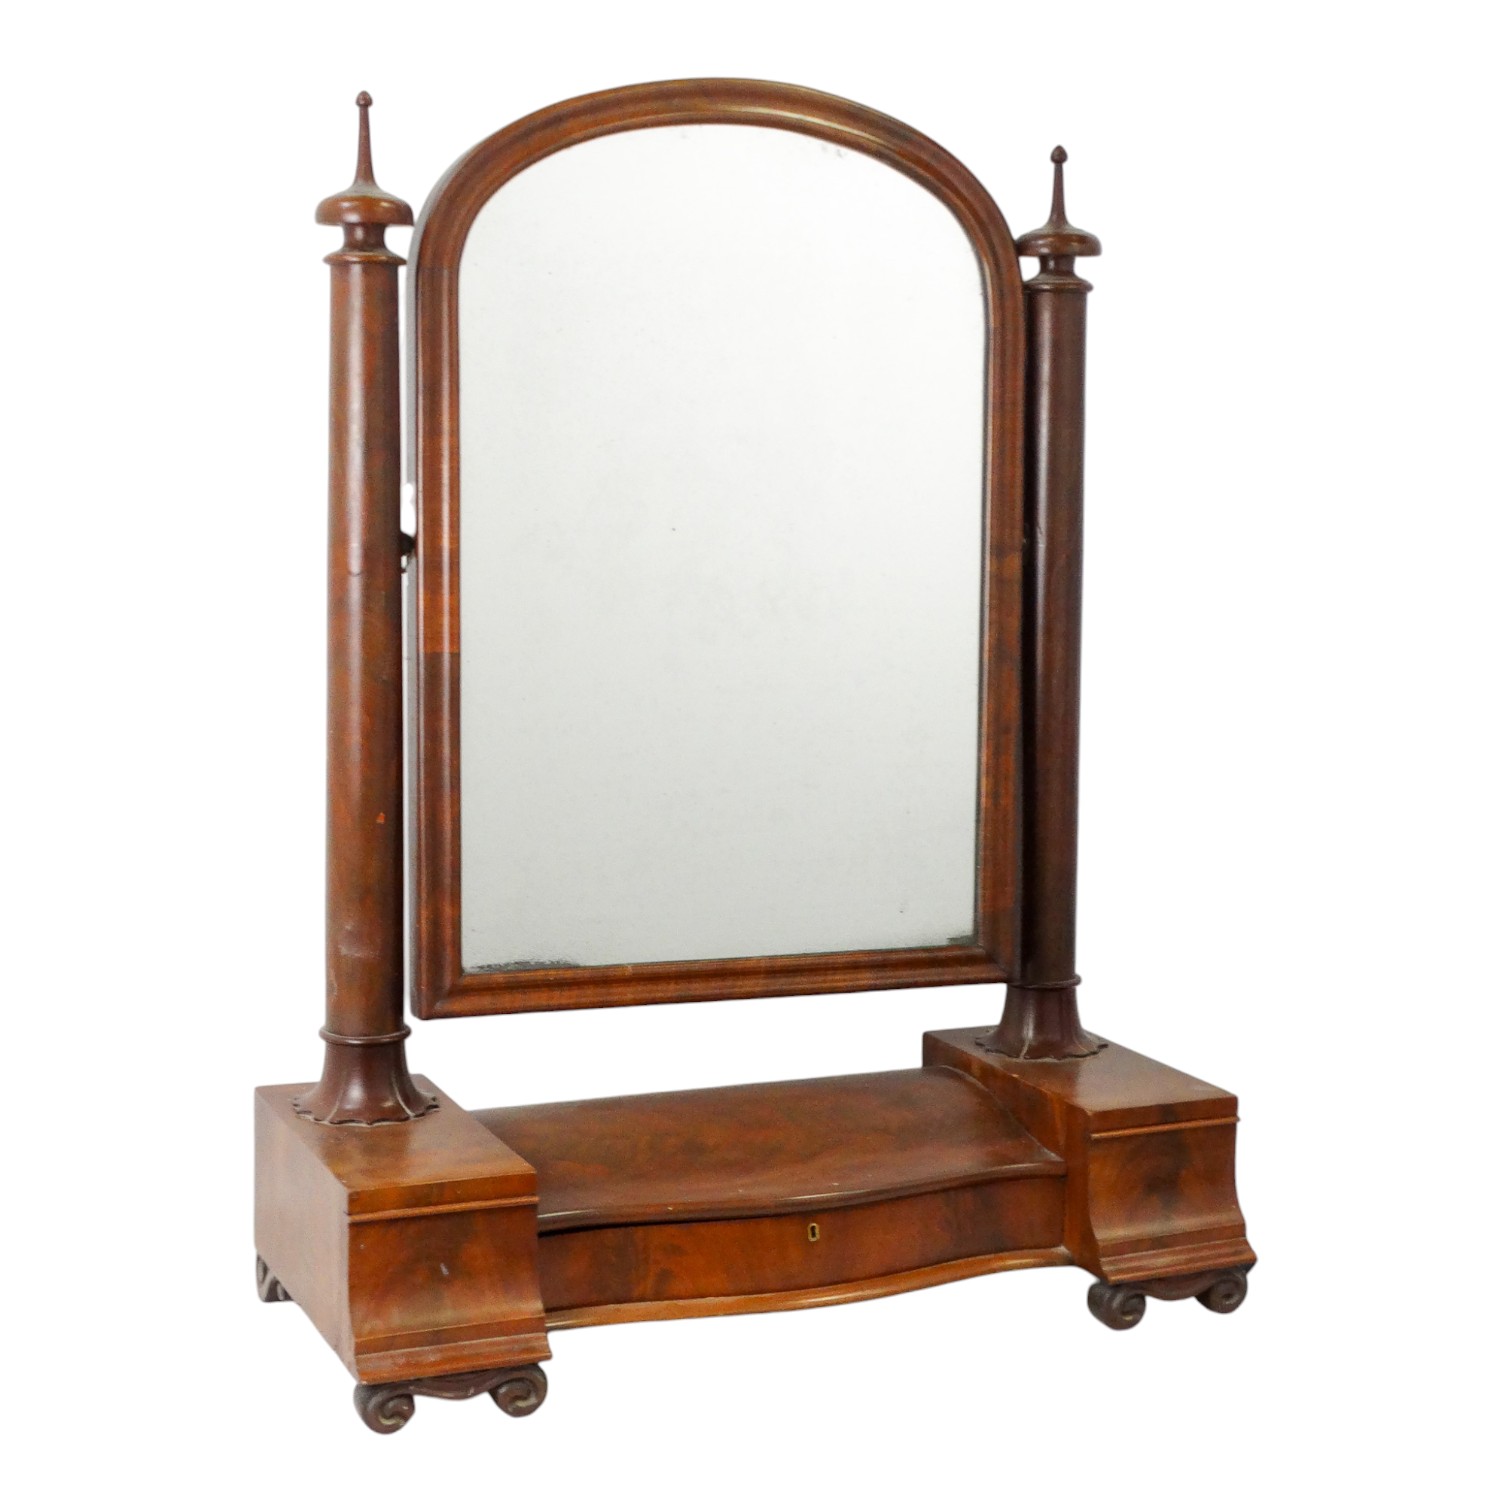 A Victorian mahogany toilet mirror - the arched rectangular plate between columnar supports, the